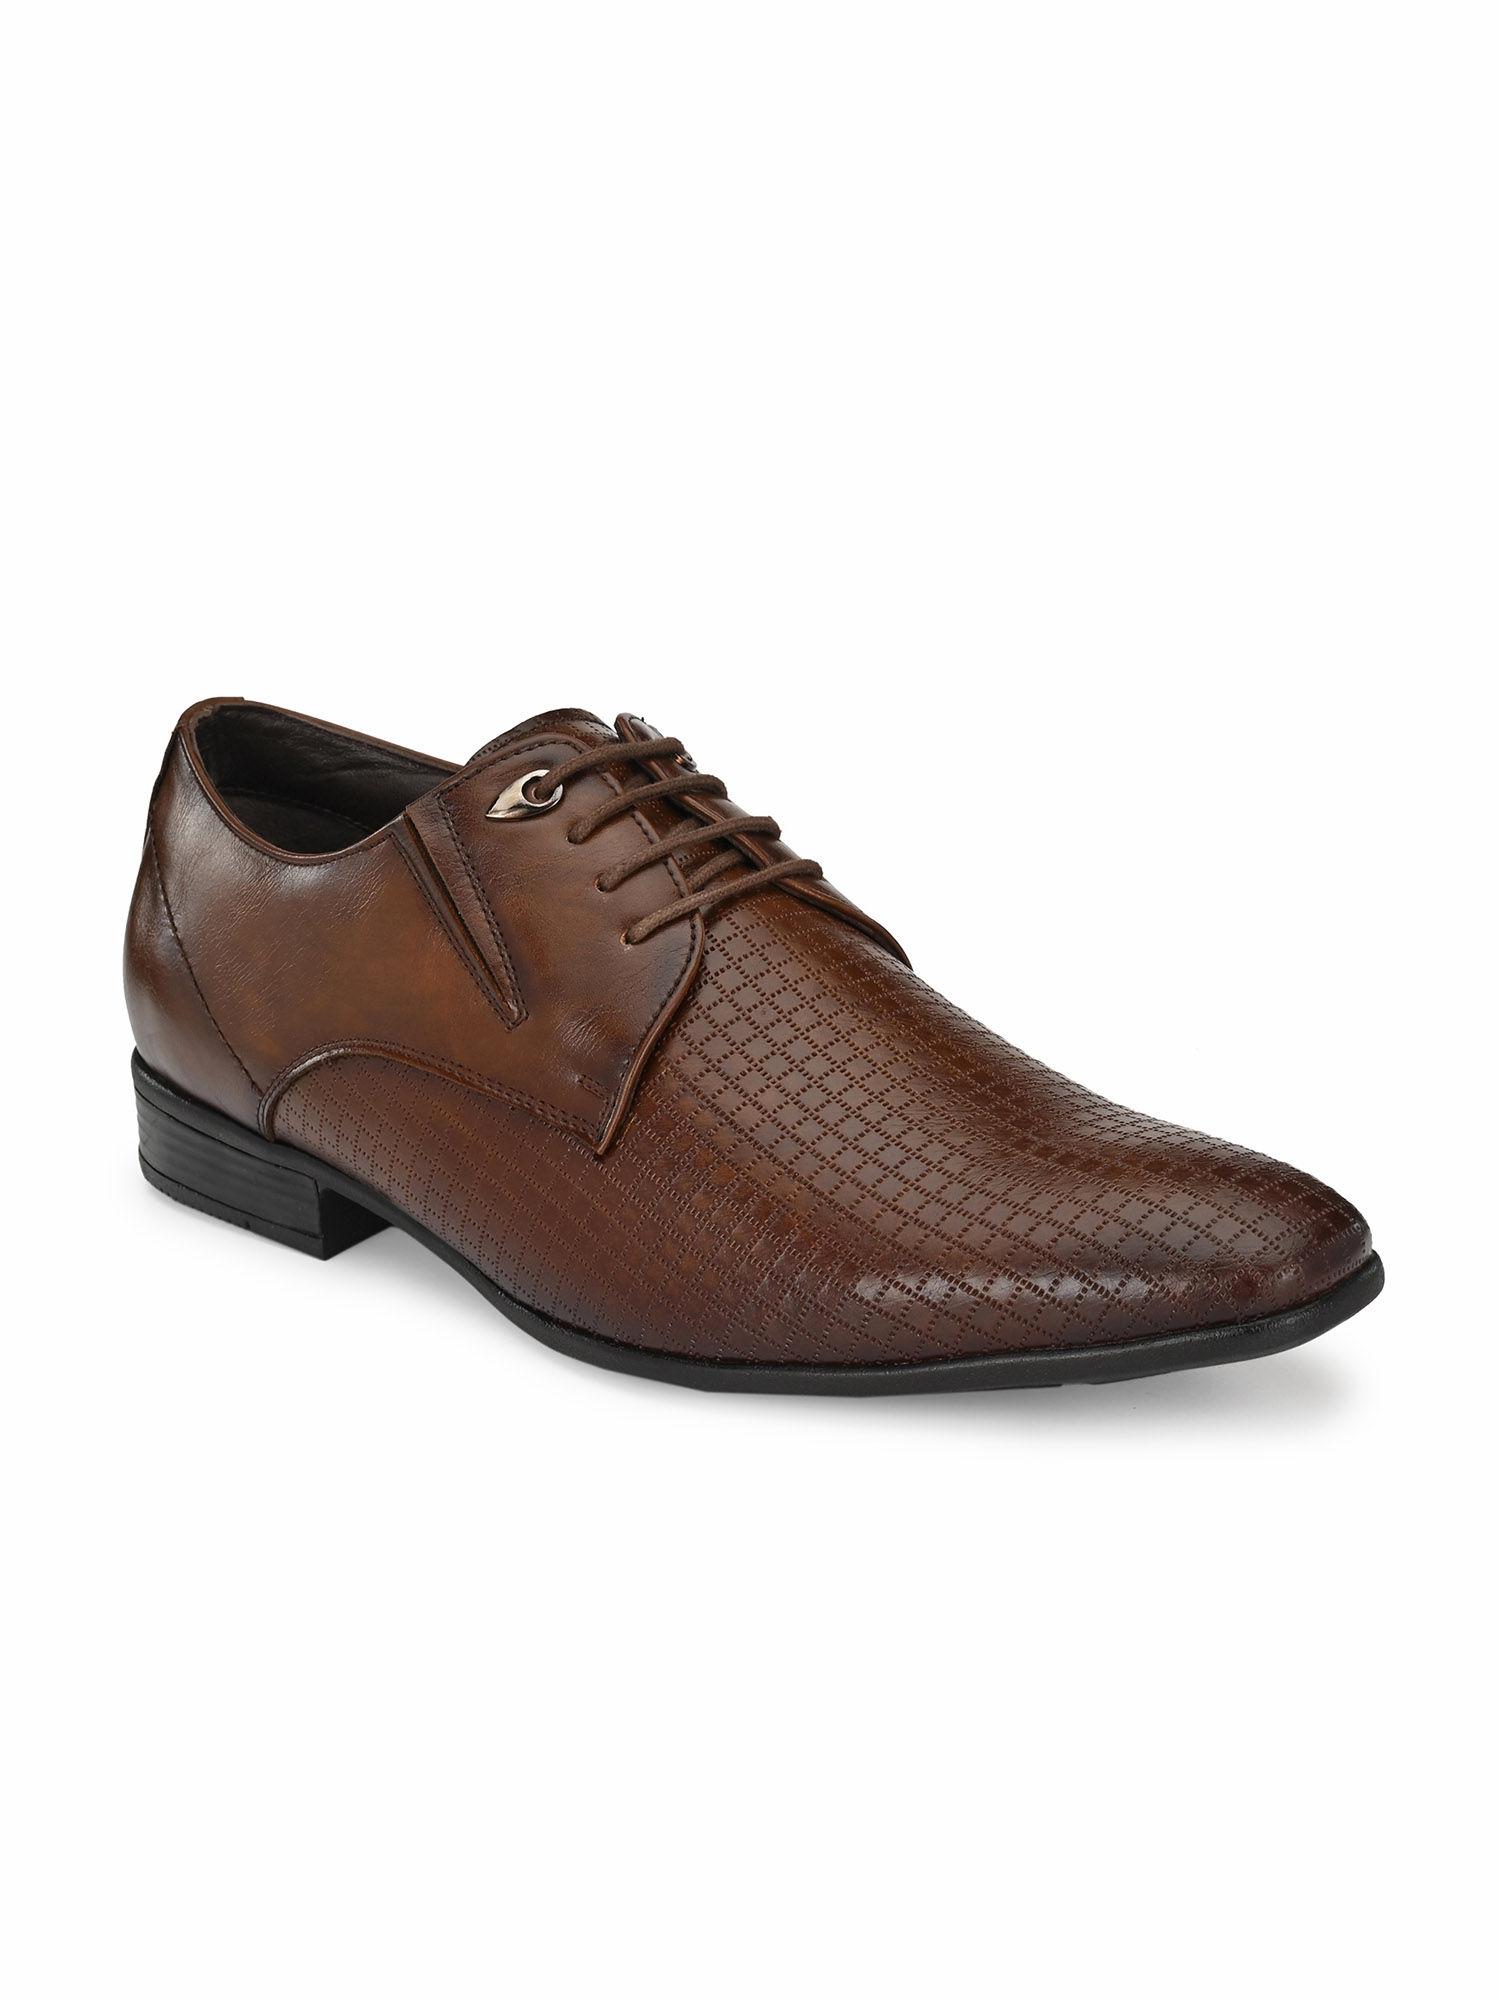 men's brown synthetic lace-up formal shoes